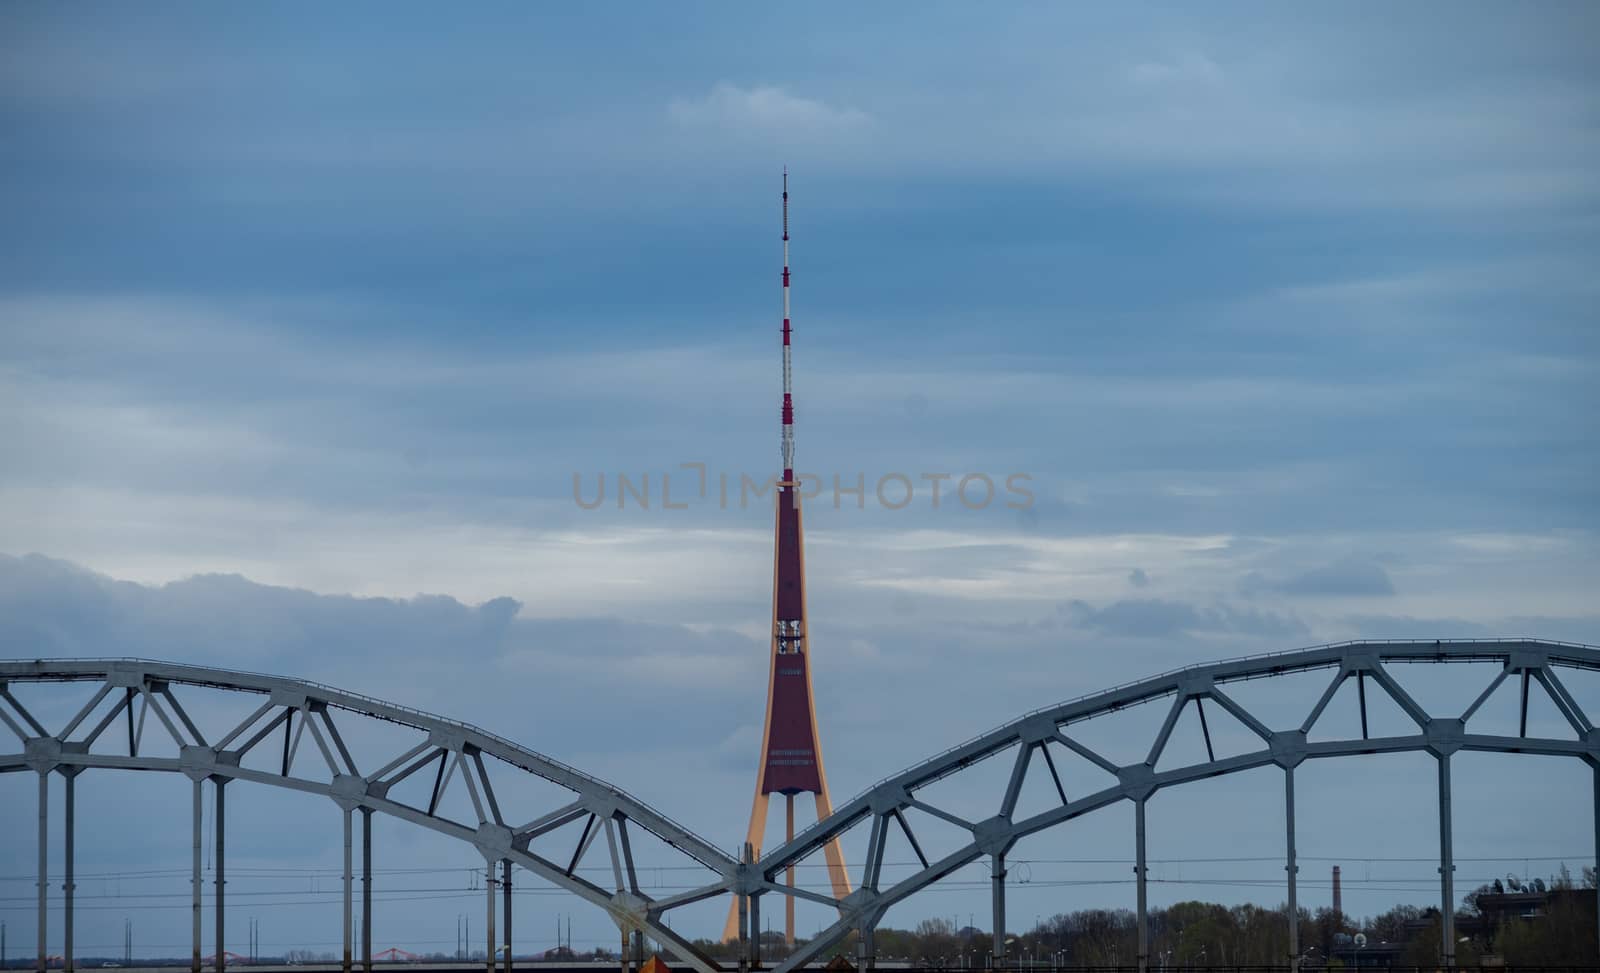 April 24, 2018 Riga, Latvia. View of the Riga Television Tower and the metal trusses of the railway bridge over the Daugava